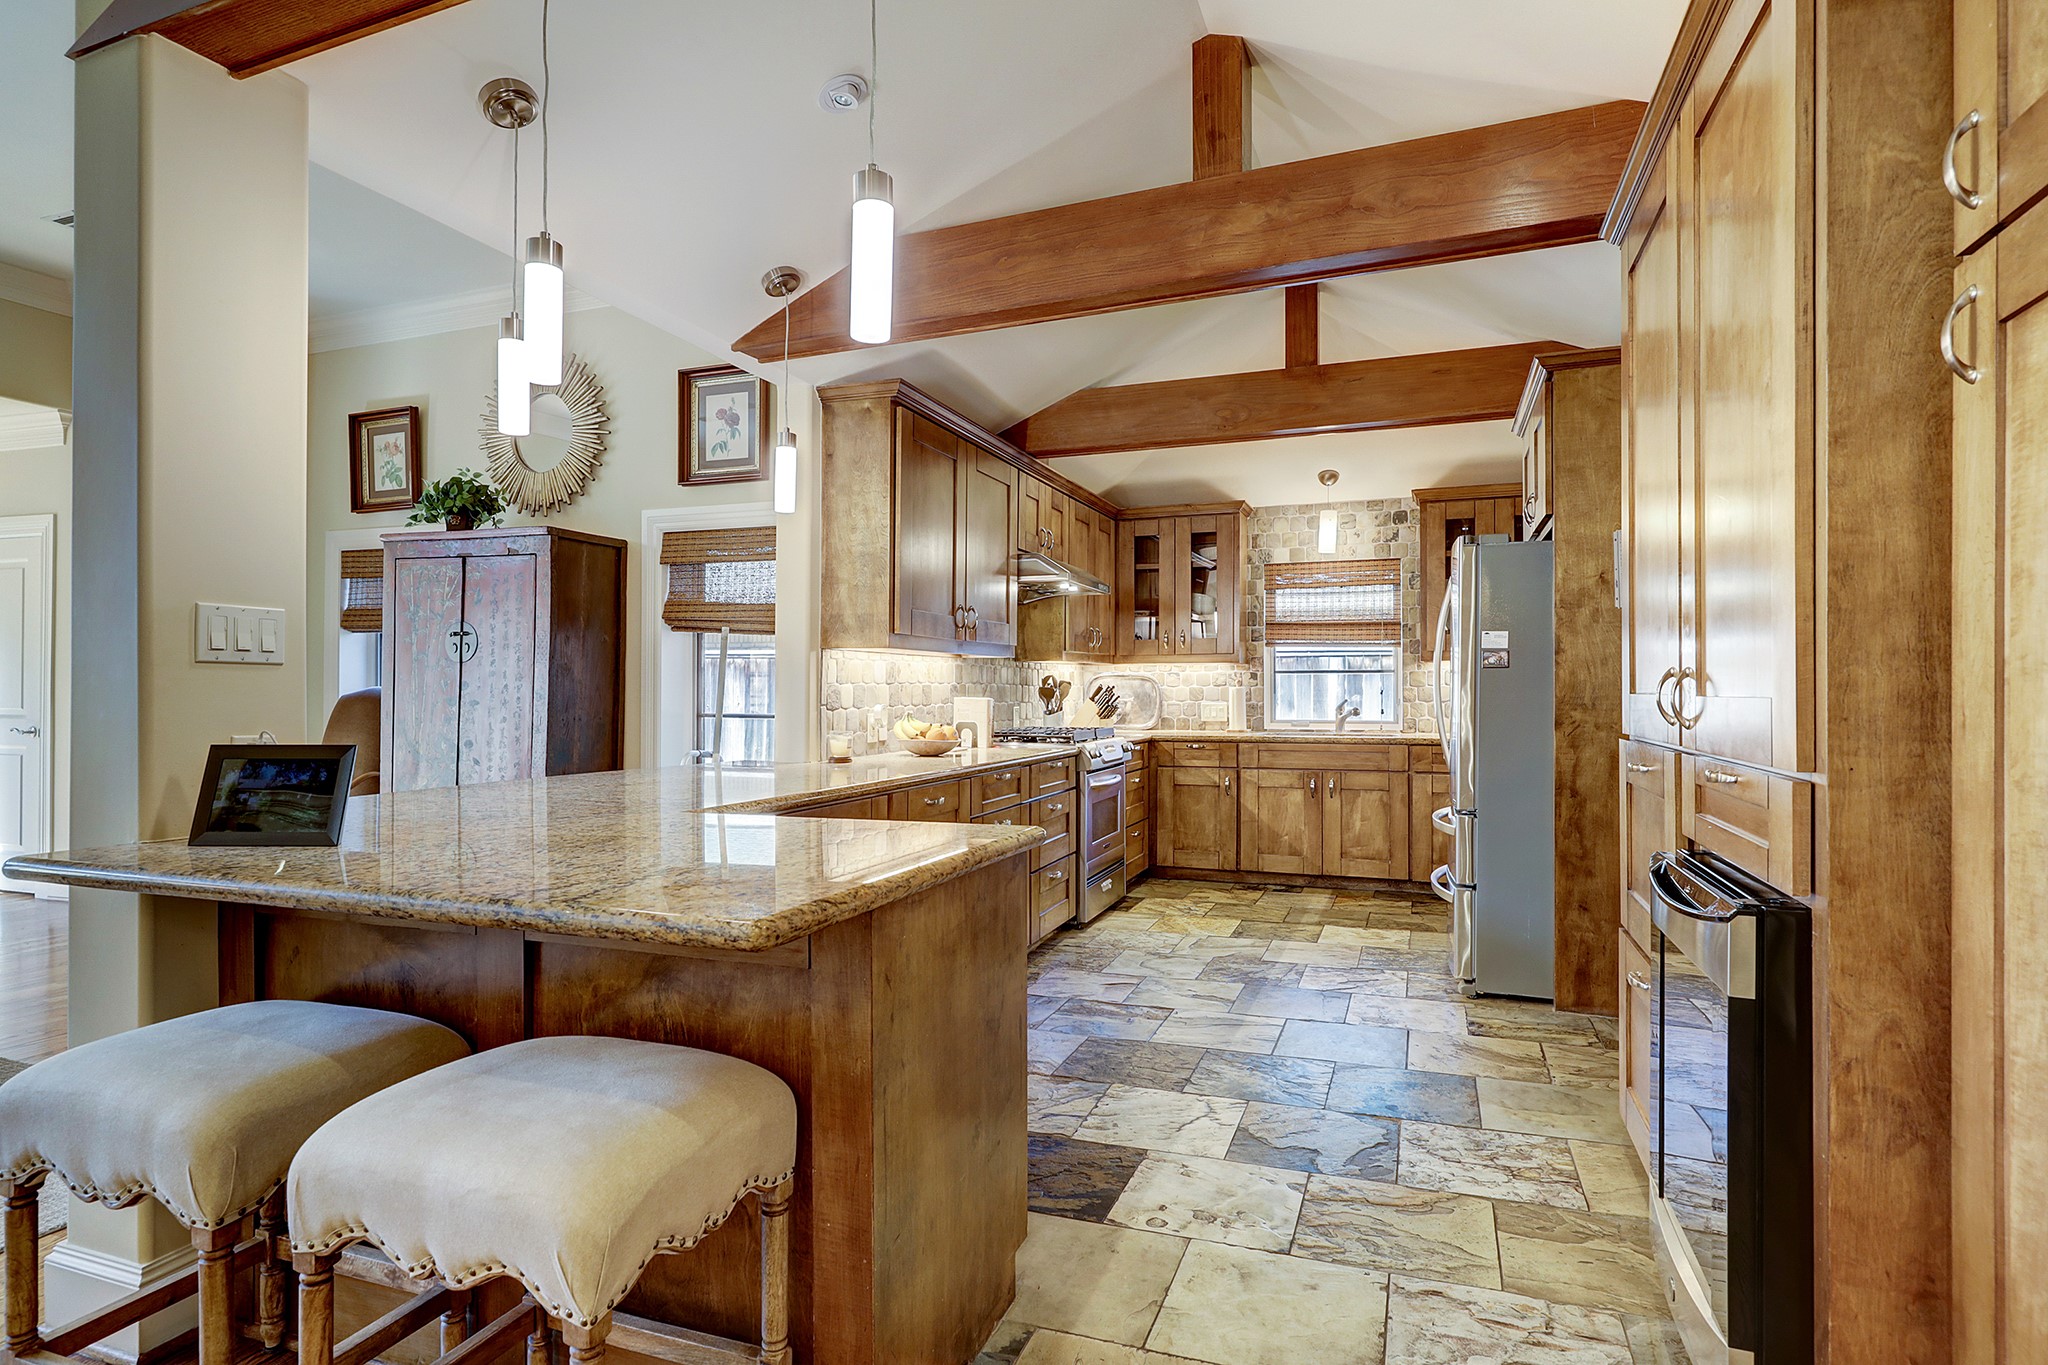 Kitchen opens to Family Room and boasts vaulted ceilings with handsome wooden beams, stainless steel appliances, gas range, granite countertops, and loads of storage!